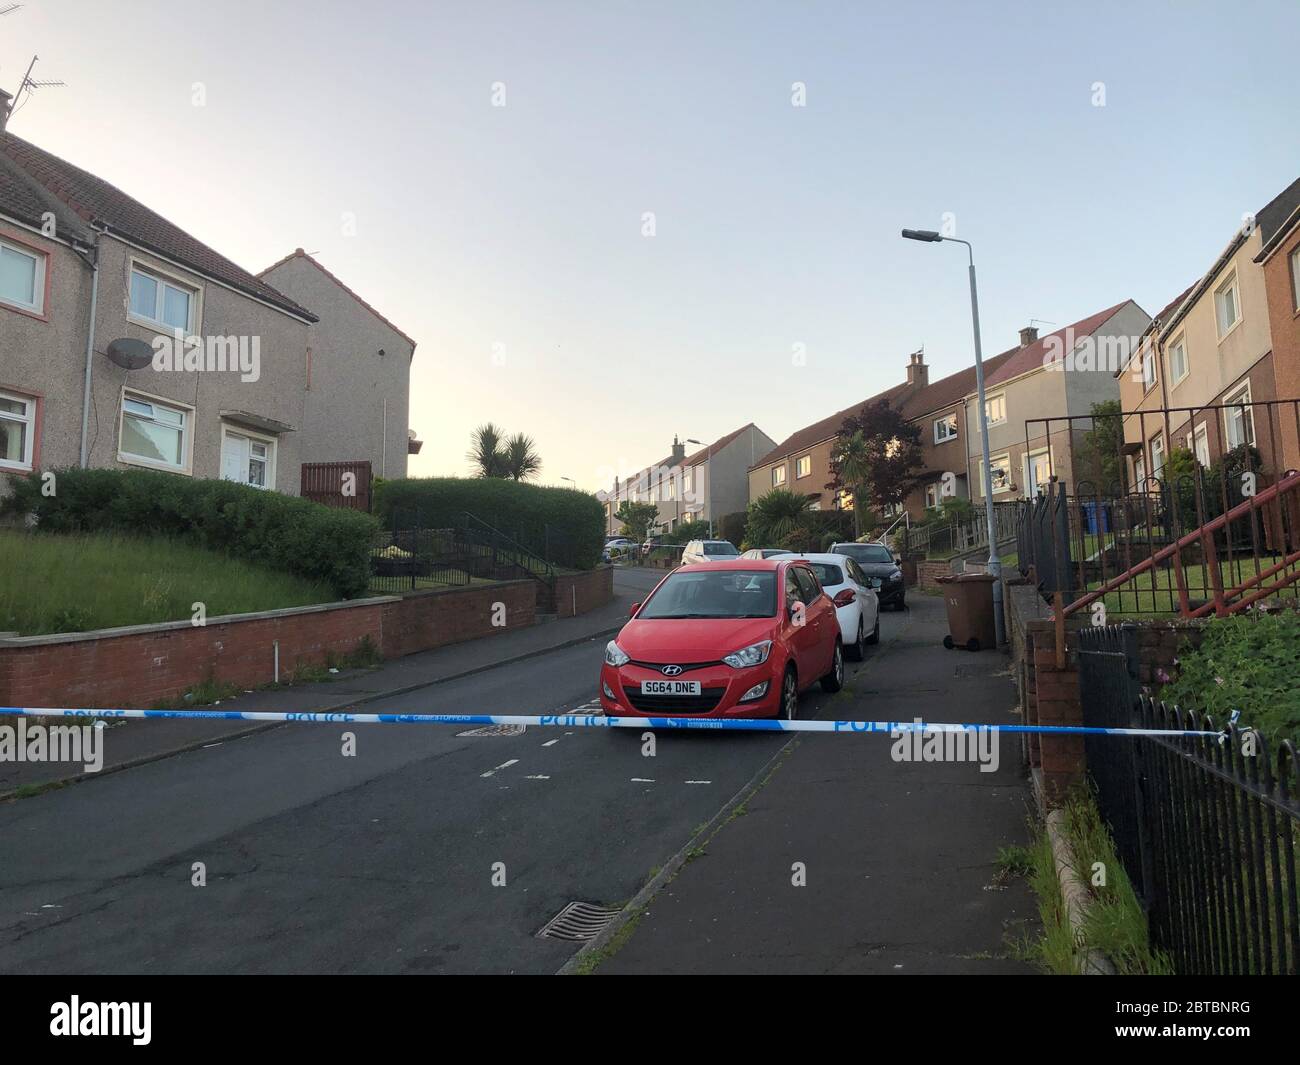 Police at the scene of a shooting in Nithsdale Road, Ardrossan in North Ayrshire, where a 42-year-old man has died following a shooting. Police Scotland said a search is ongoing in Ardrossan for the suspect. Stock Photo